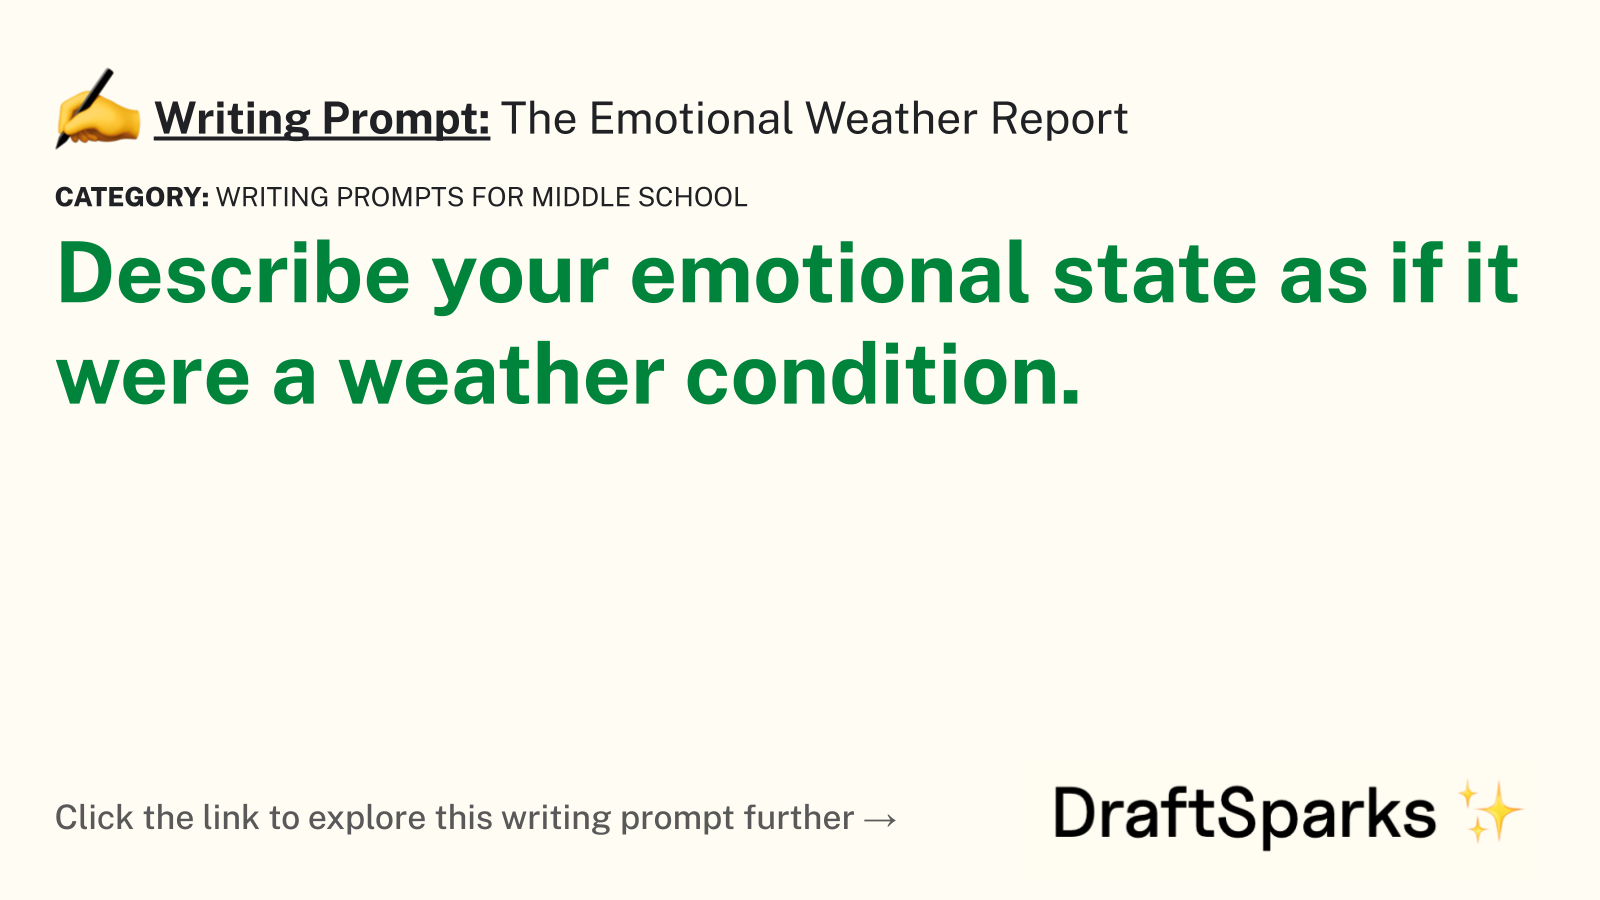 The Emotional Weather Report